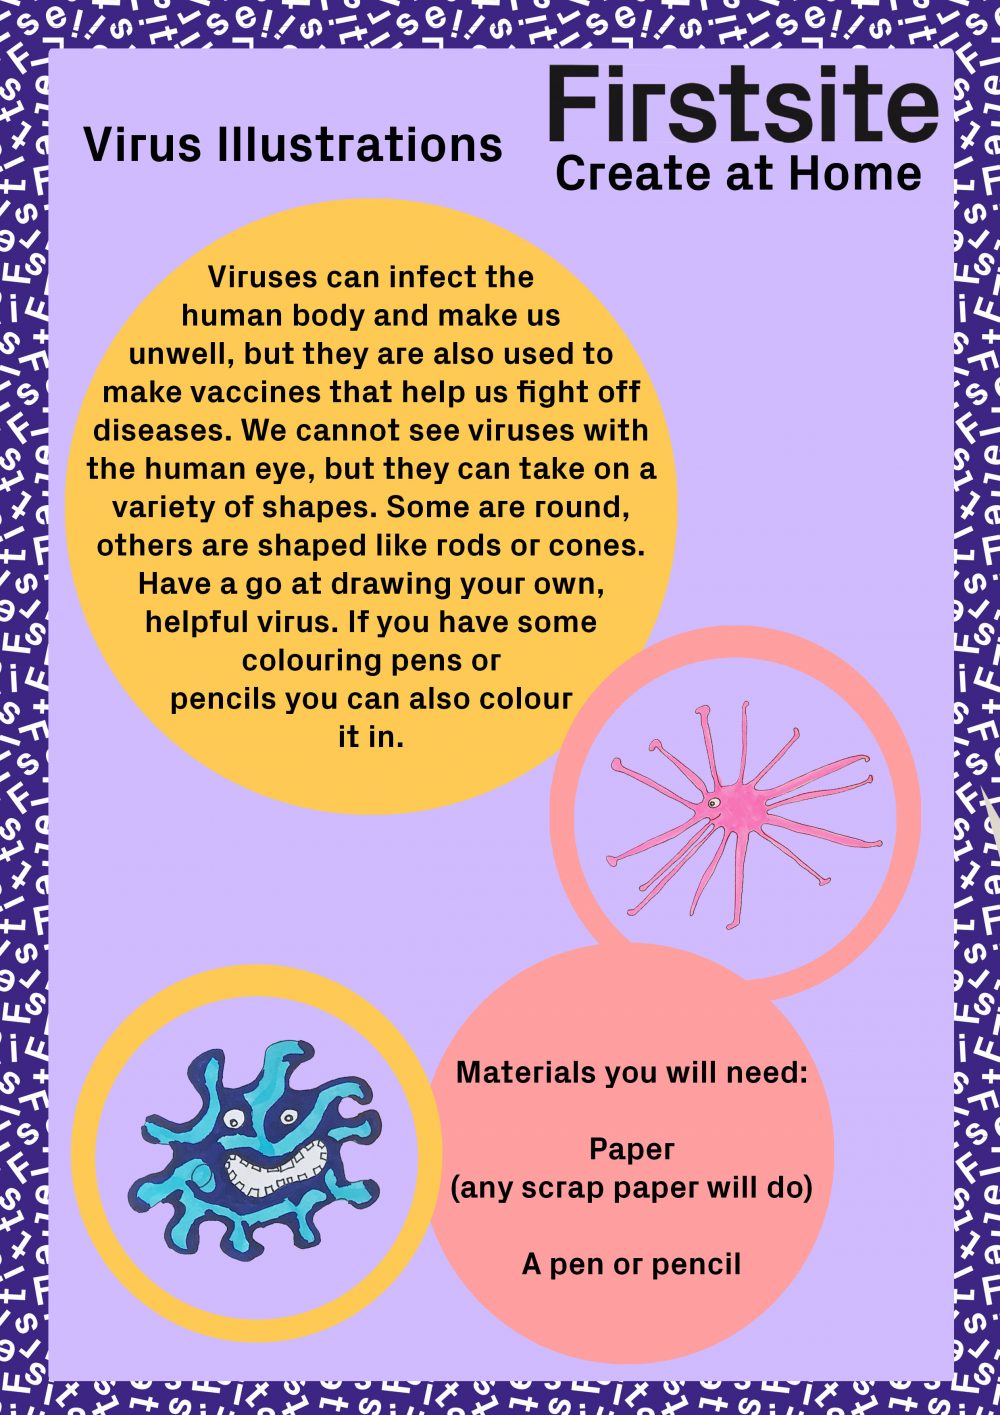 Instructions on how to draw a virus